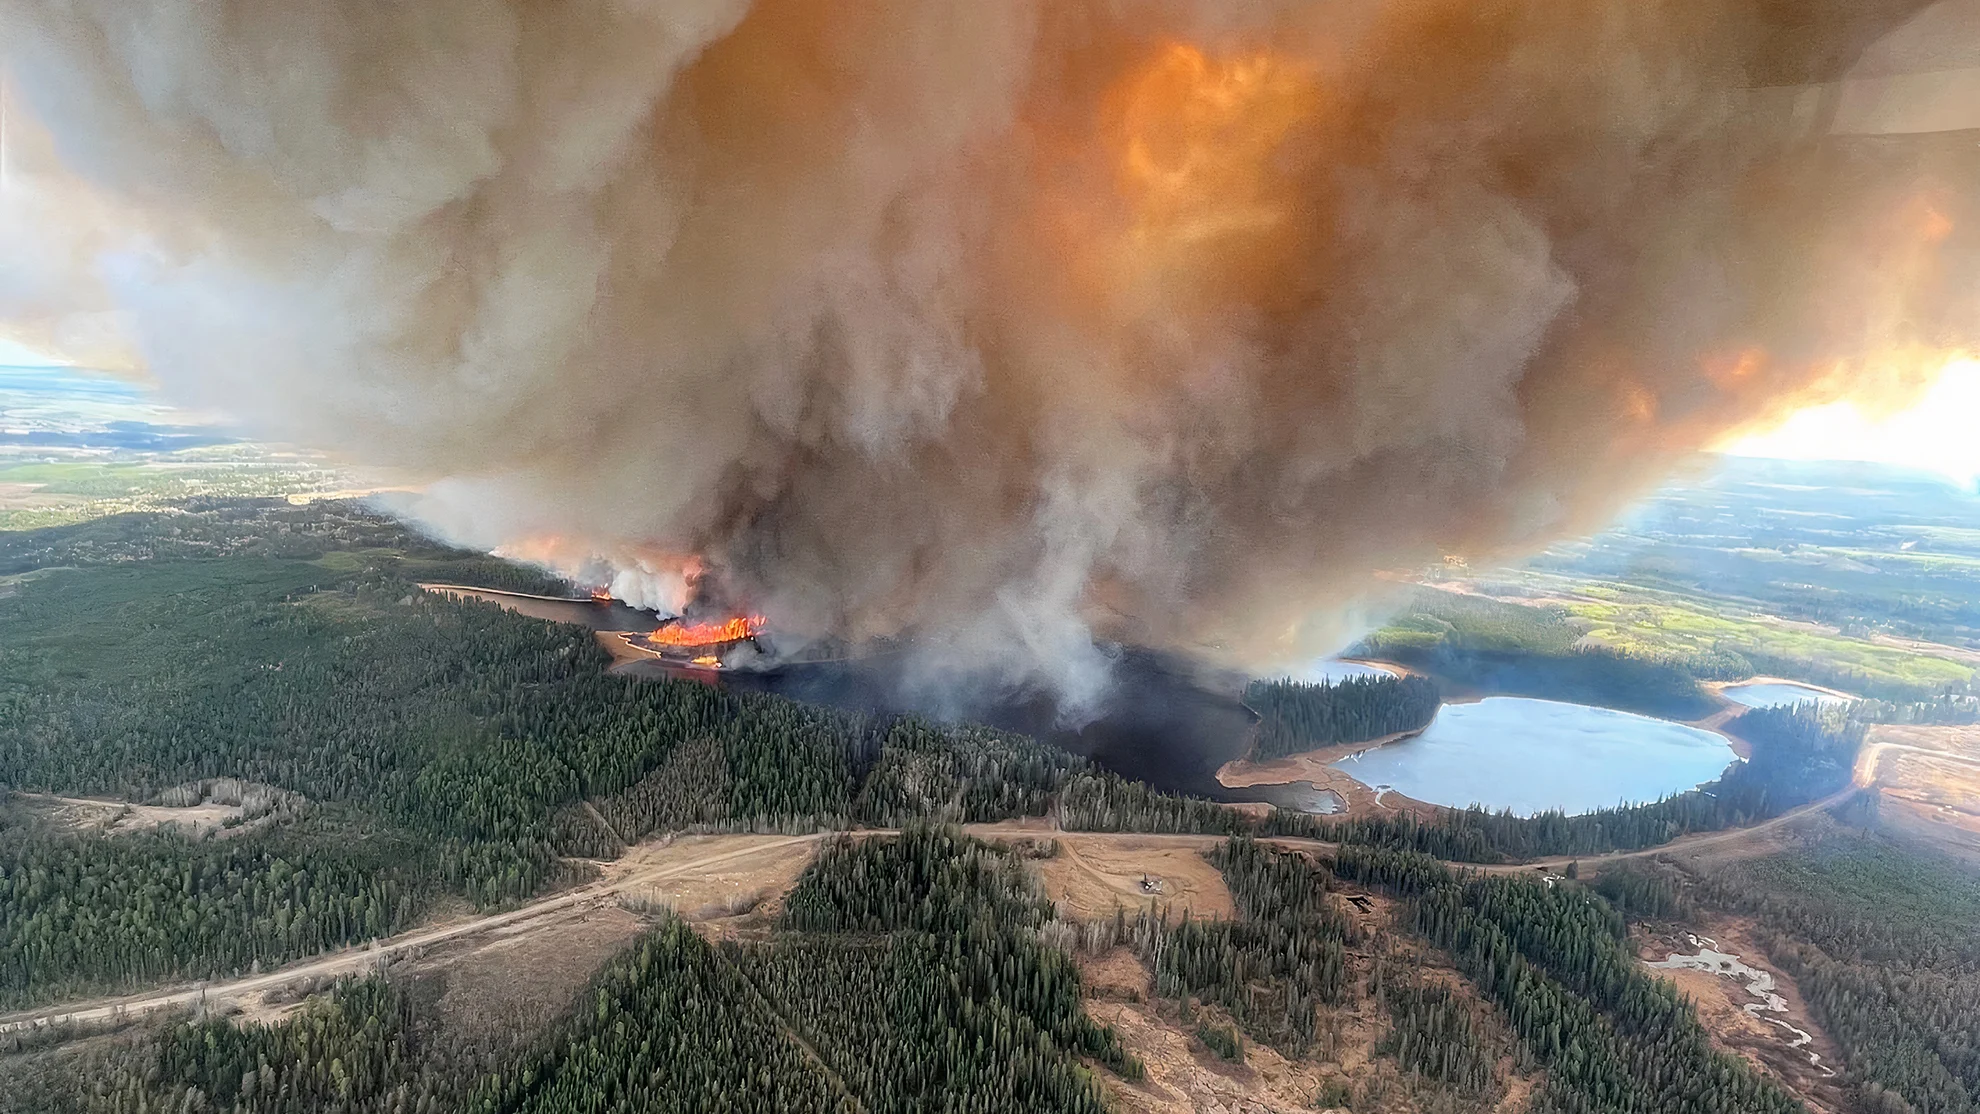 What role did climate change play in Alberta’s wildfires?